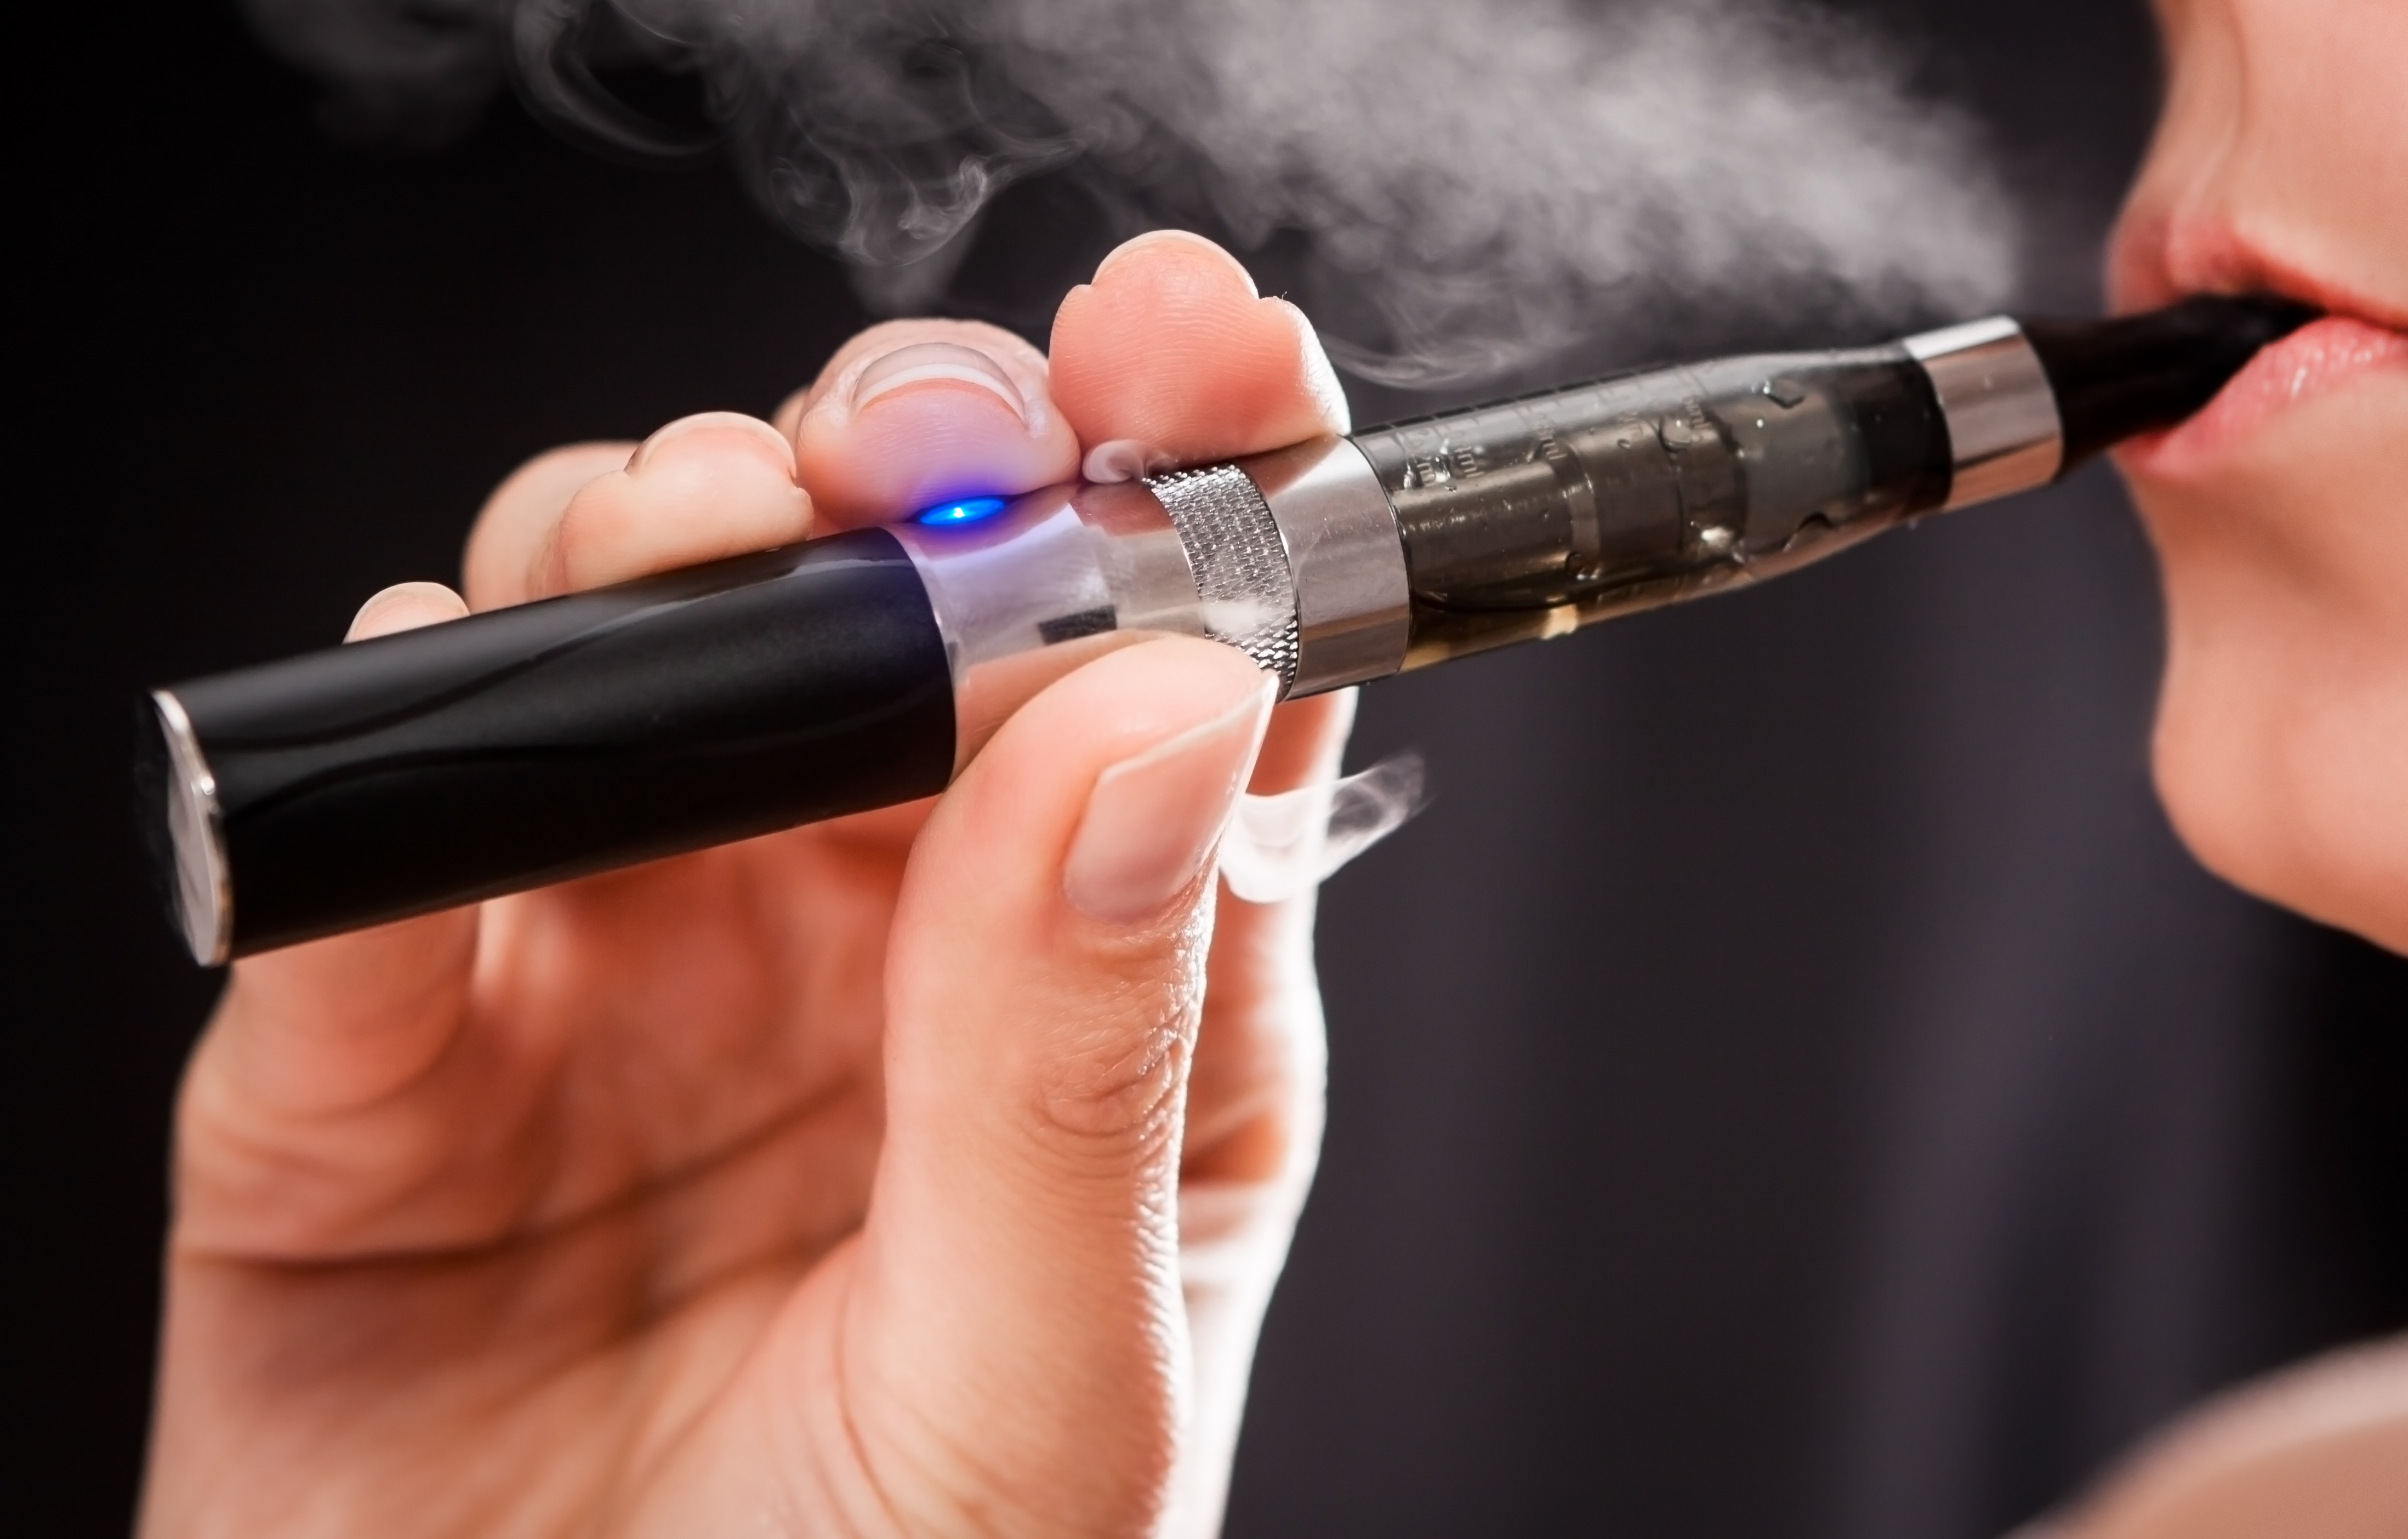 E-Cigarette Makers Target Youth With Advertising And Flavor, Report ...